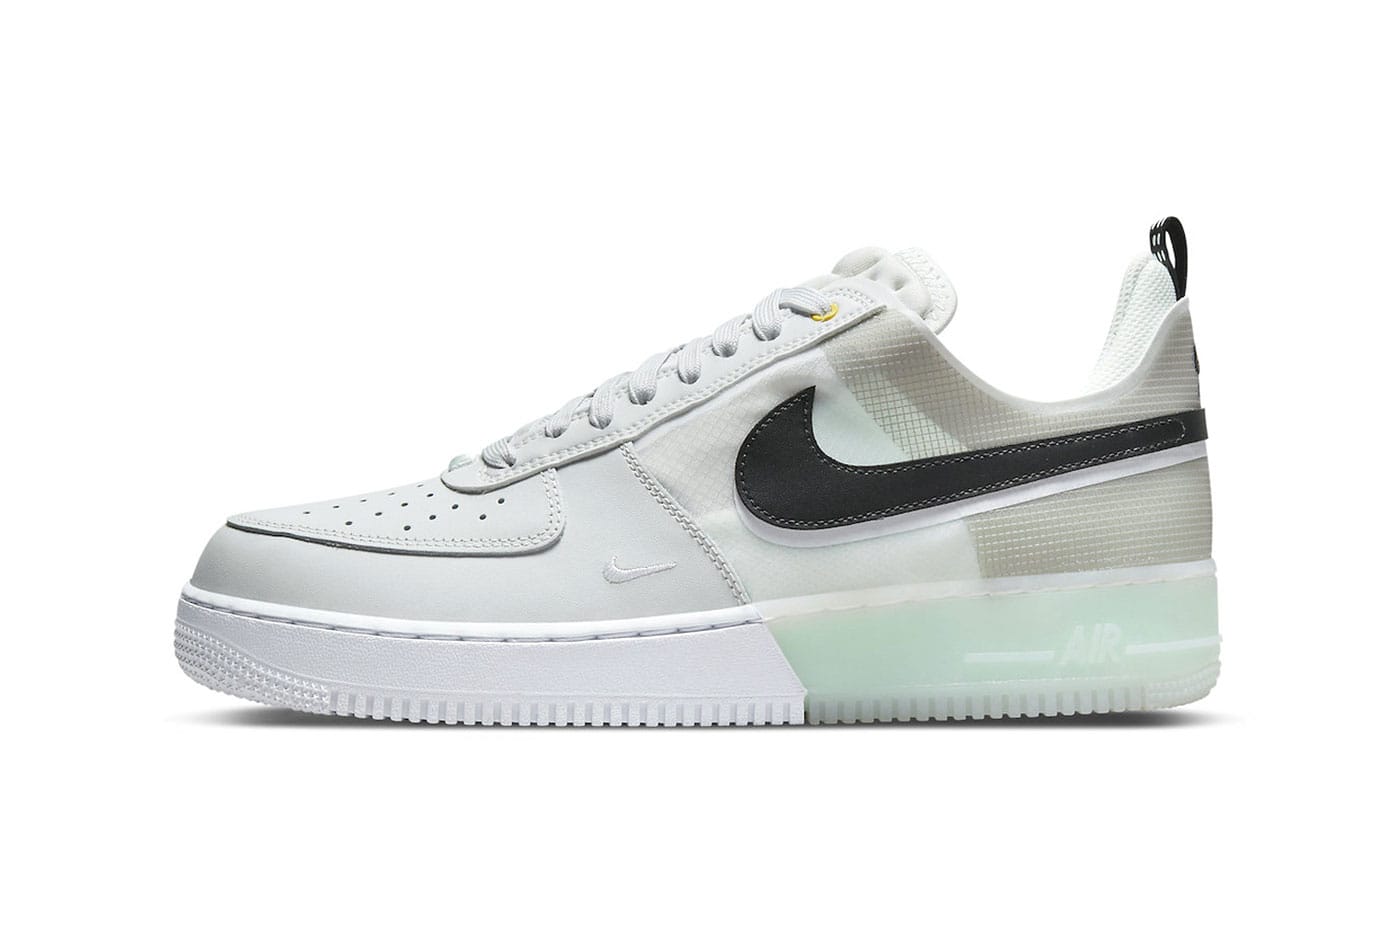 when did air force 1 react come out